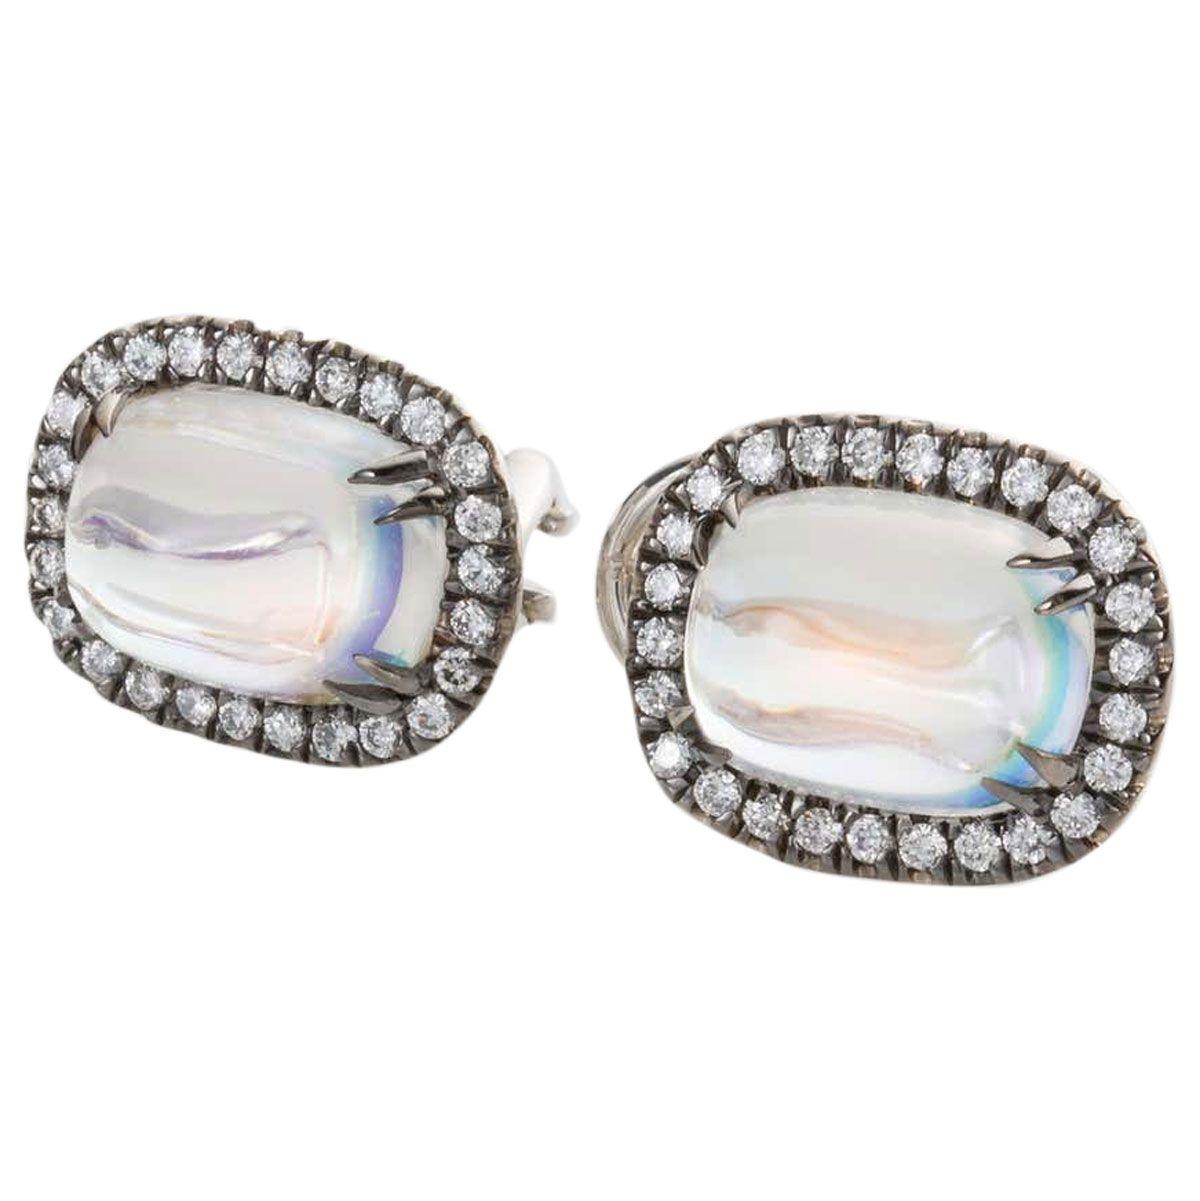 Words and photos will never describe the beauty of these rainbow moonstones. The colours are like the Northern lights glowing across the sky, these gems have the Northern lights trapped inside. The colours that emanate are truly divine, blues,